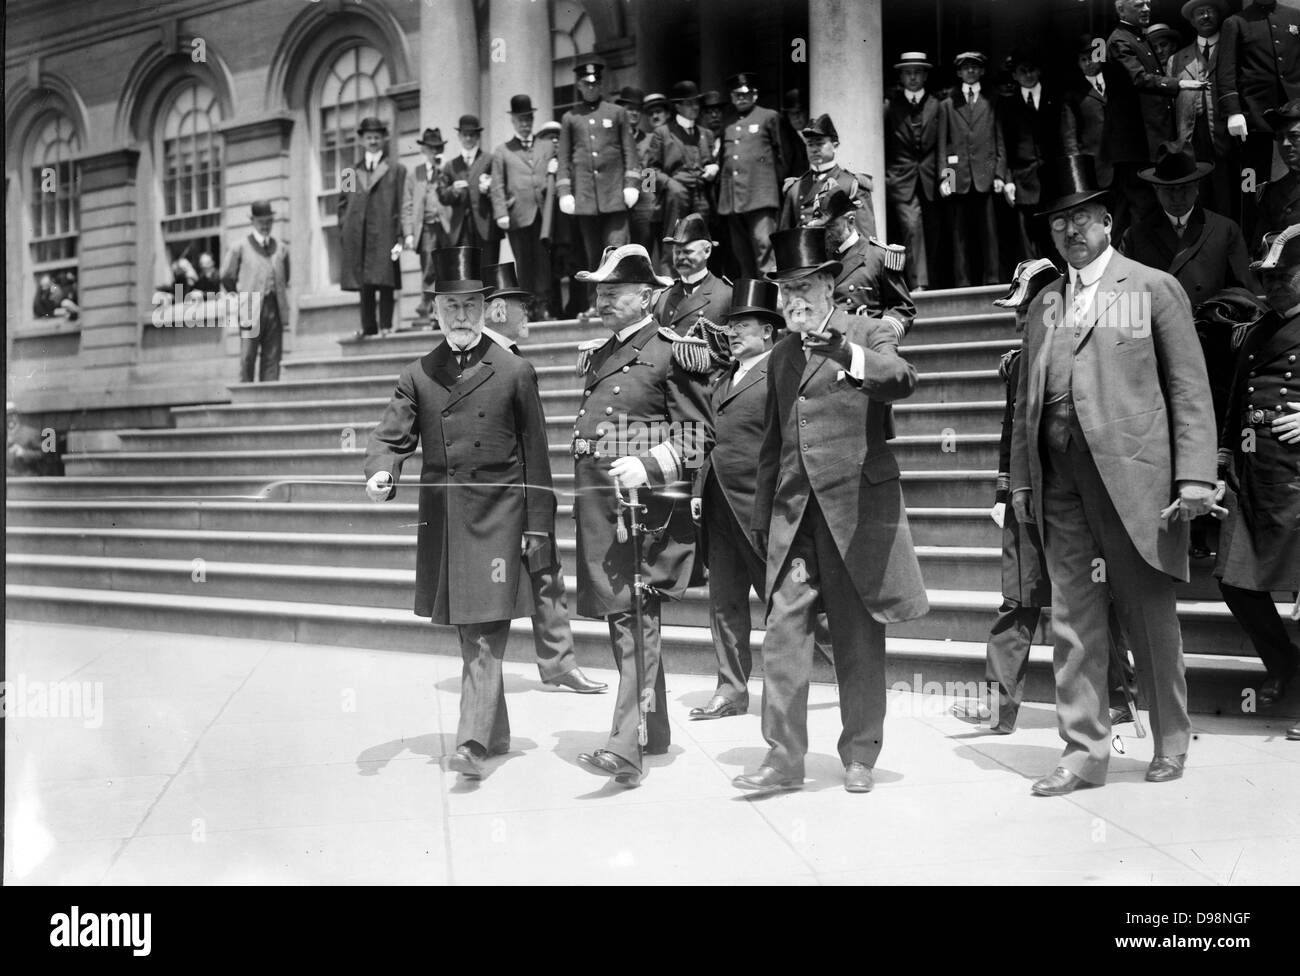 Unveiling of monument at entrance Central Park, New York to battleship Maine which exploded in Havana harbour in Spanish-American War, 1898. Mayor Gaynor, Admiral Badger and General Wilson on steps of City Hall, 19 May 1913. Stock Photo